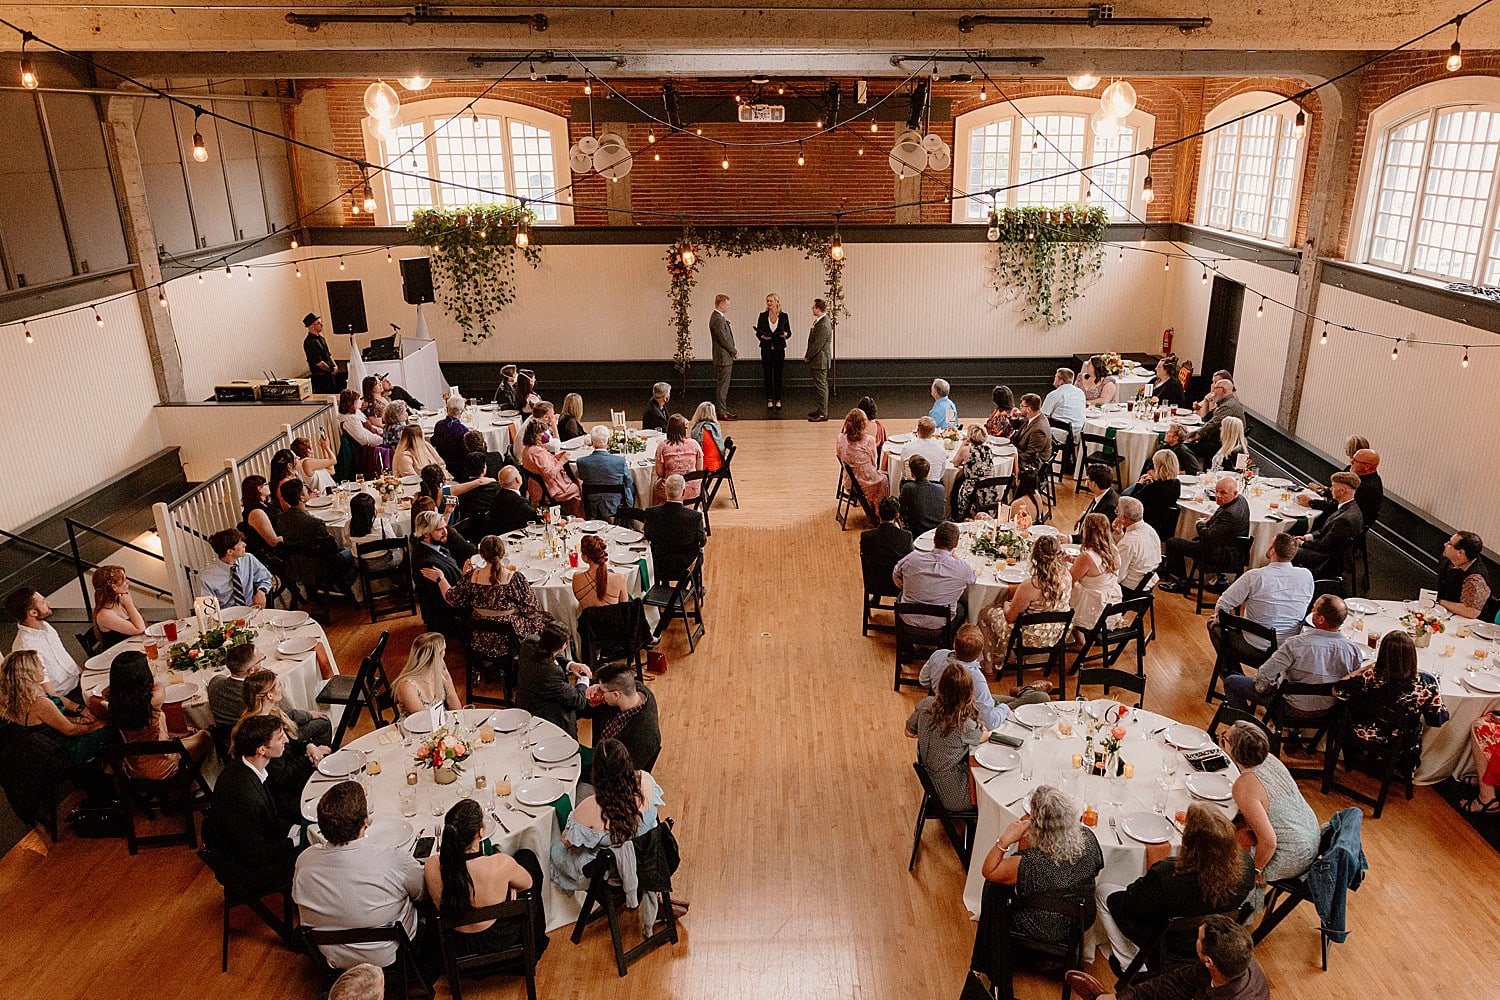 An ariel view of The Evergreen in Portland from the loft space during an indoor wedding ceremony.